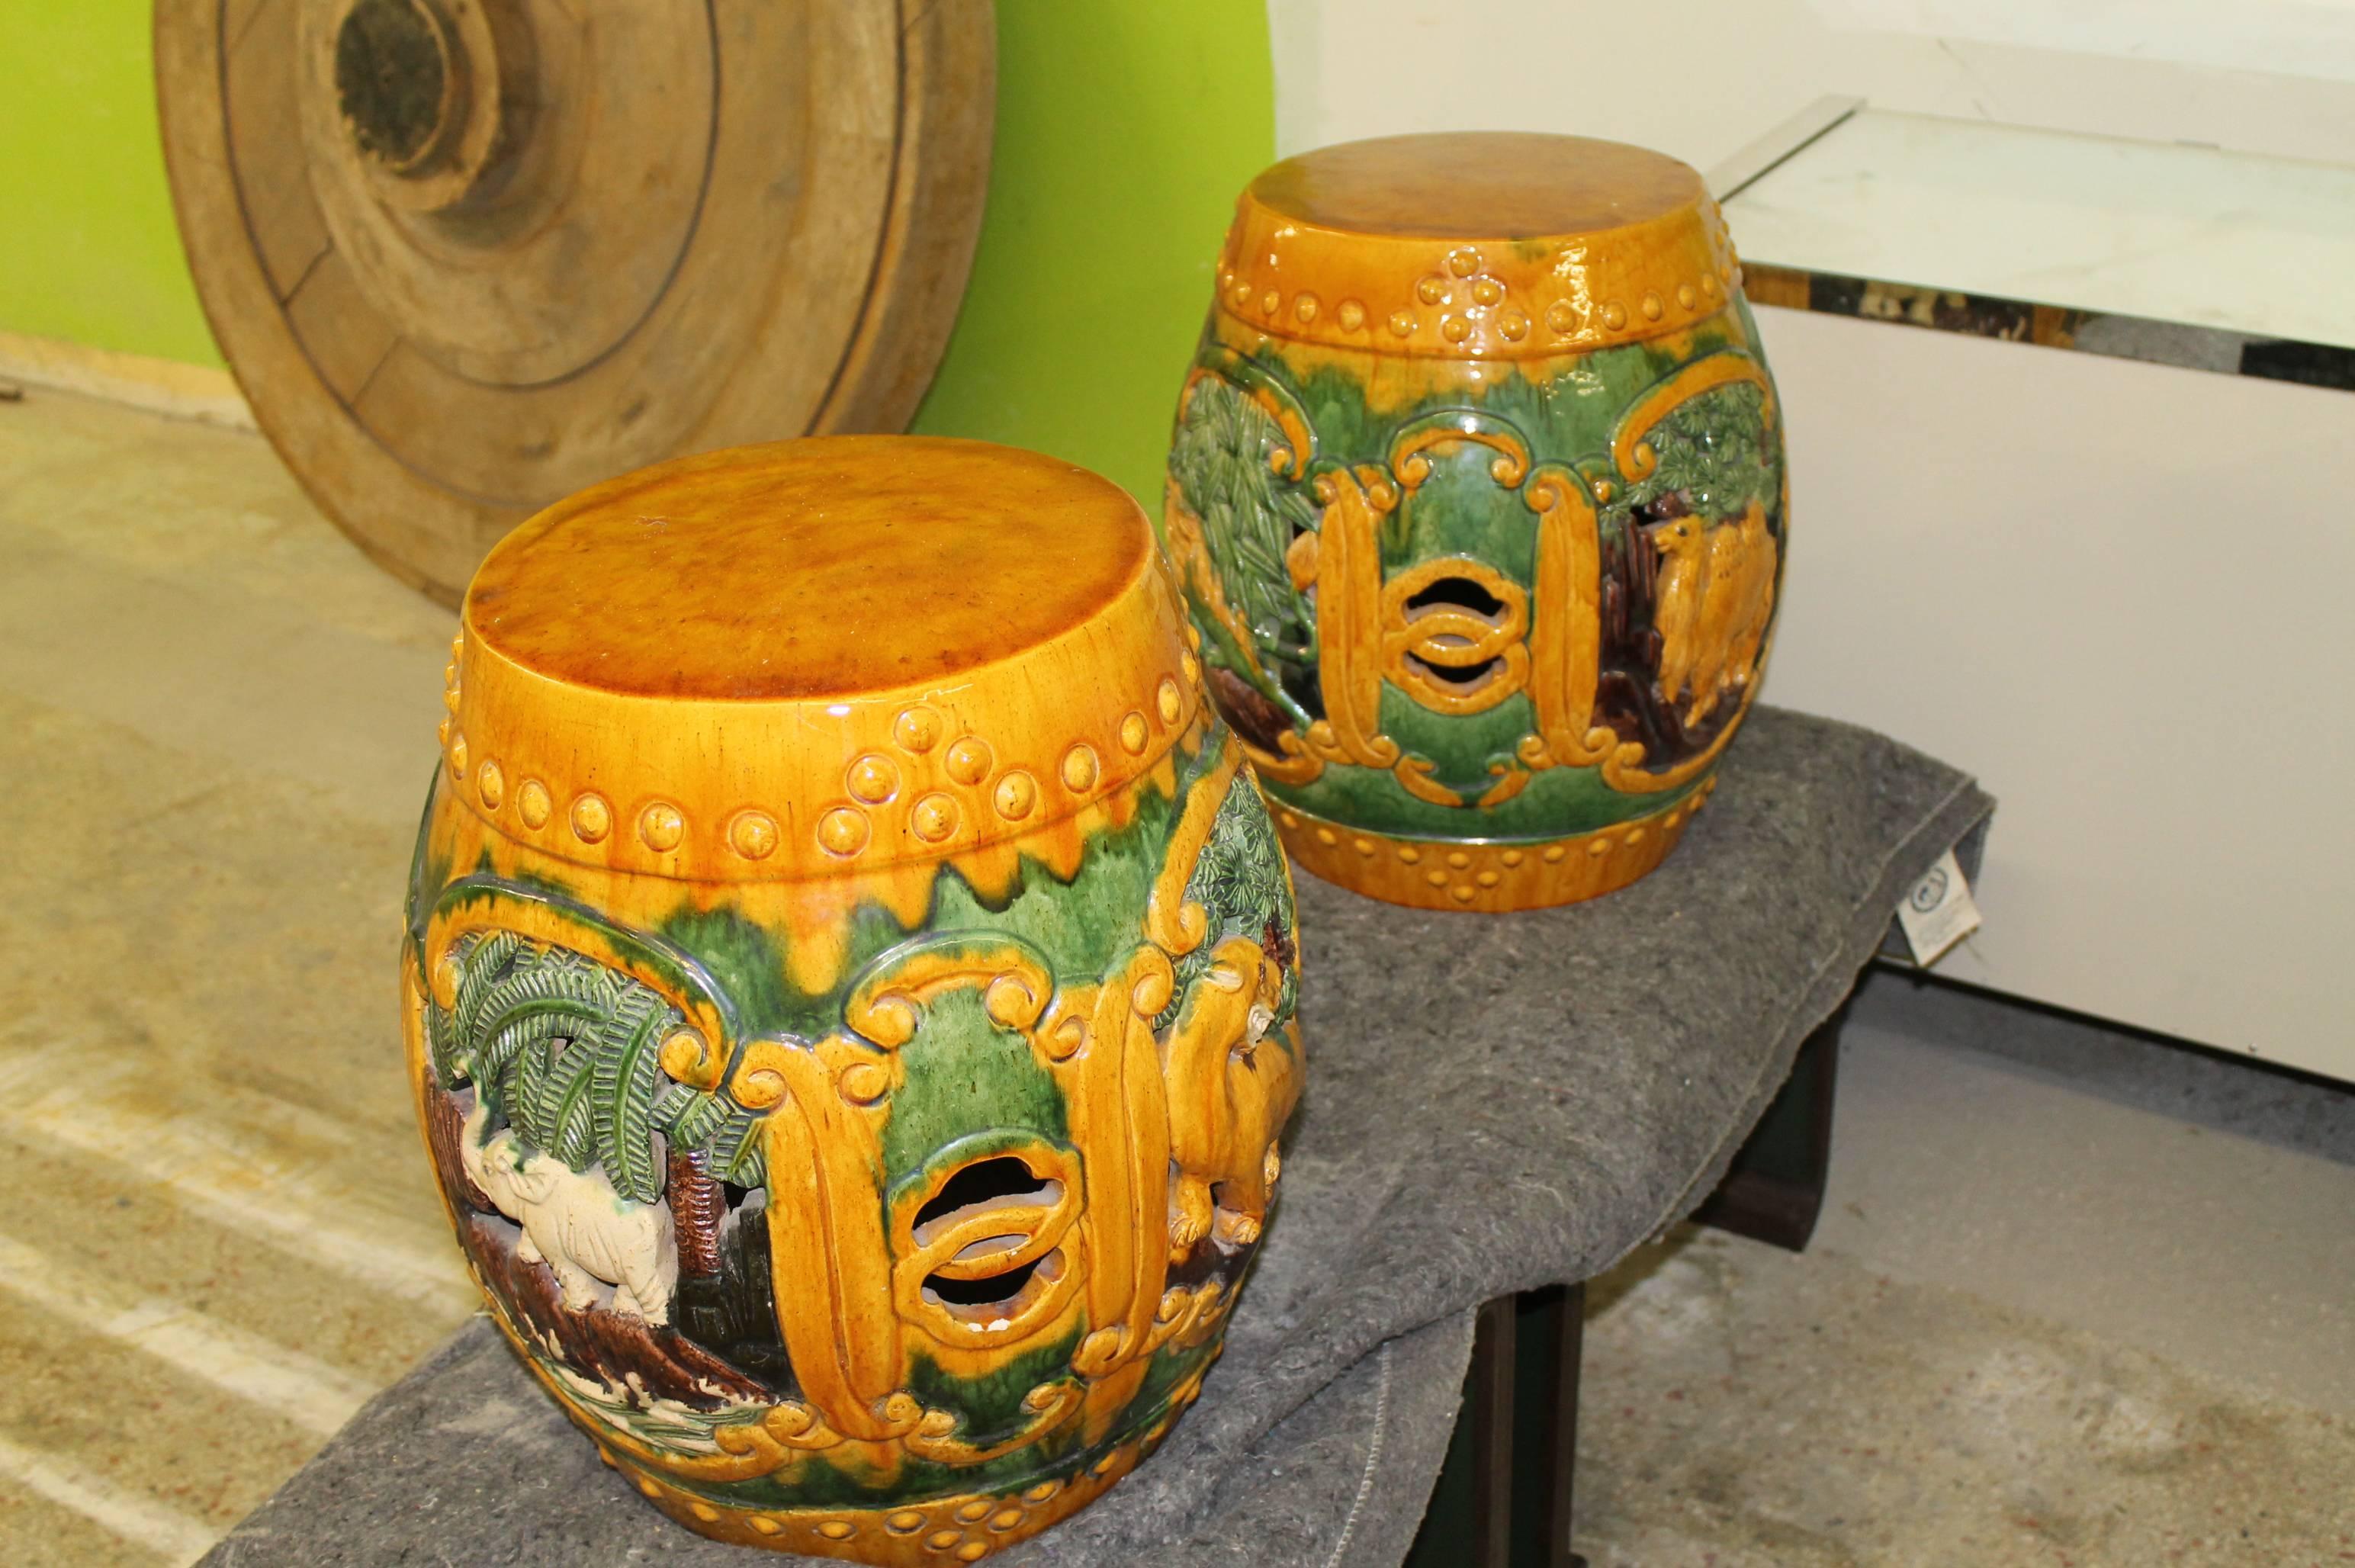 Hollywood Regency  Vintage Pair of Ceramic Garden Drum Stools or Stands with Camels and Elephants